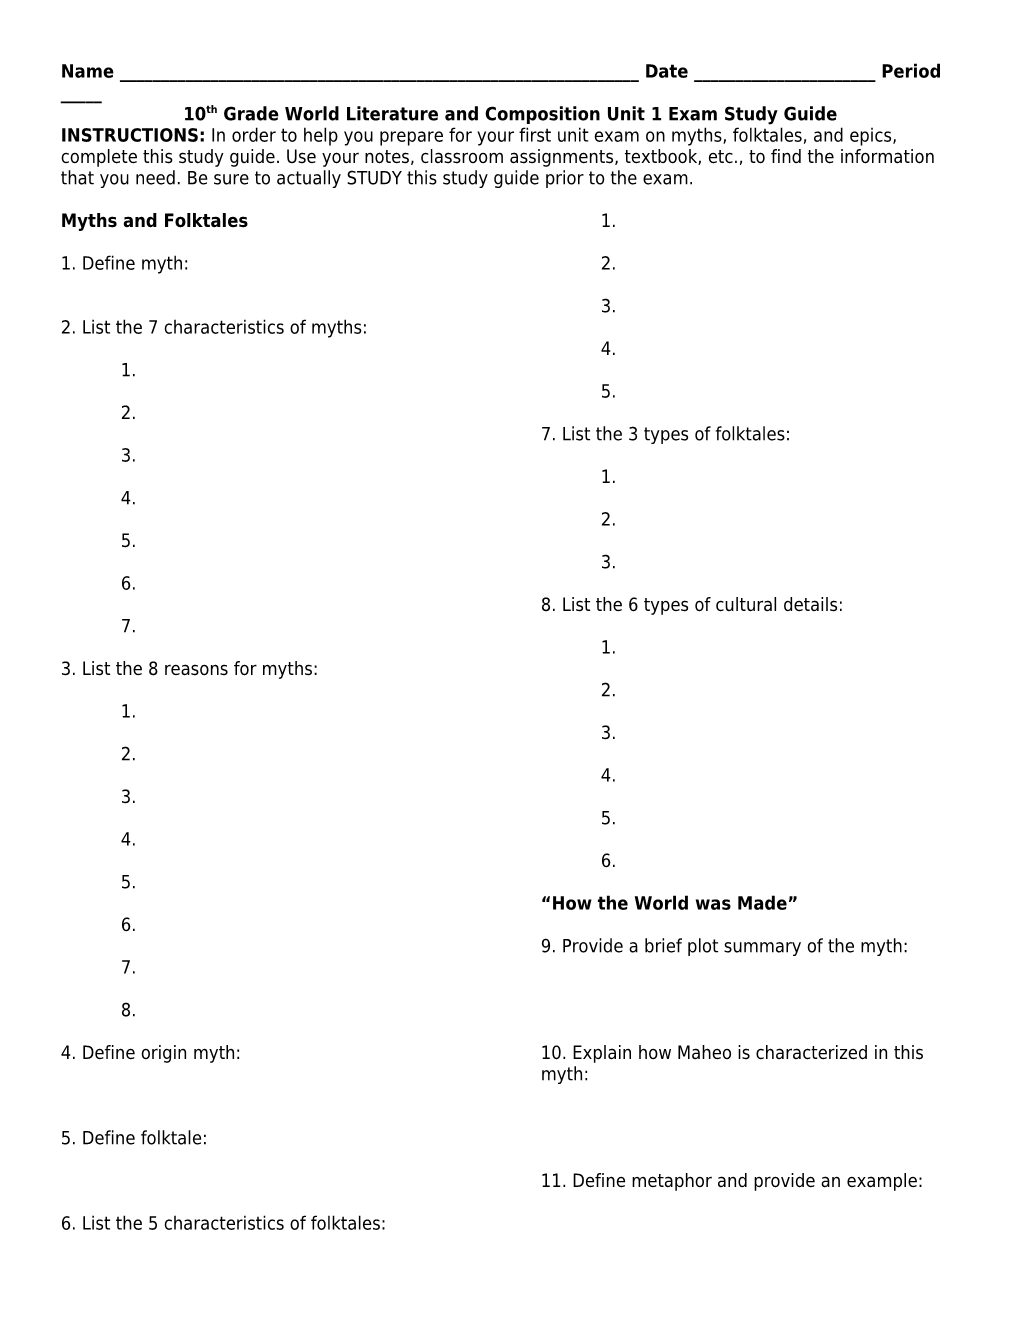 10Th Grade World Literature and Composition Unit 1 Exam Study Guide